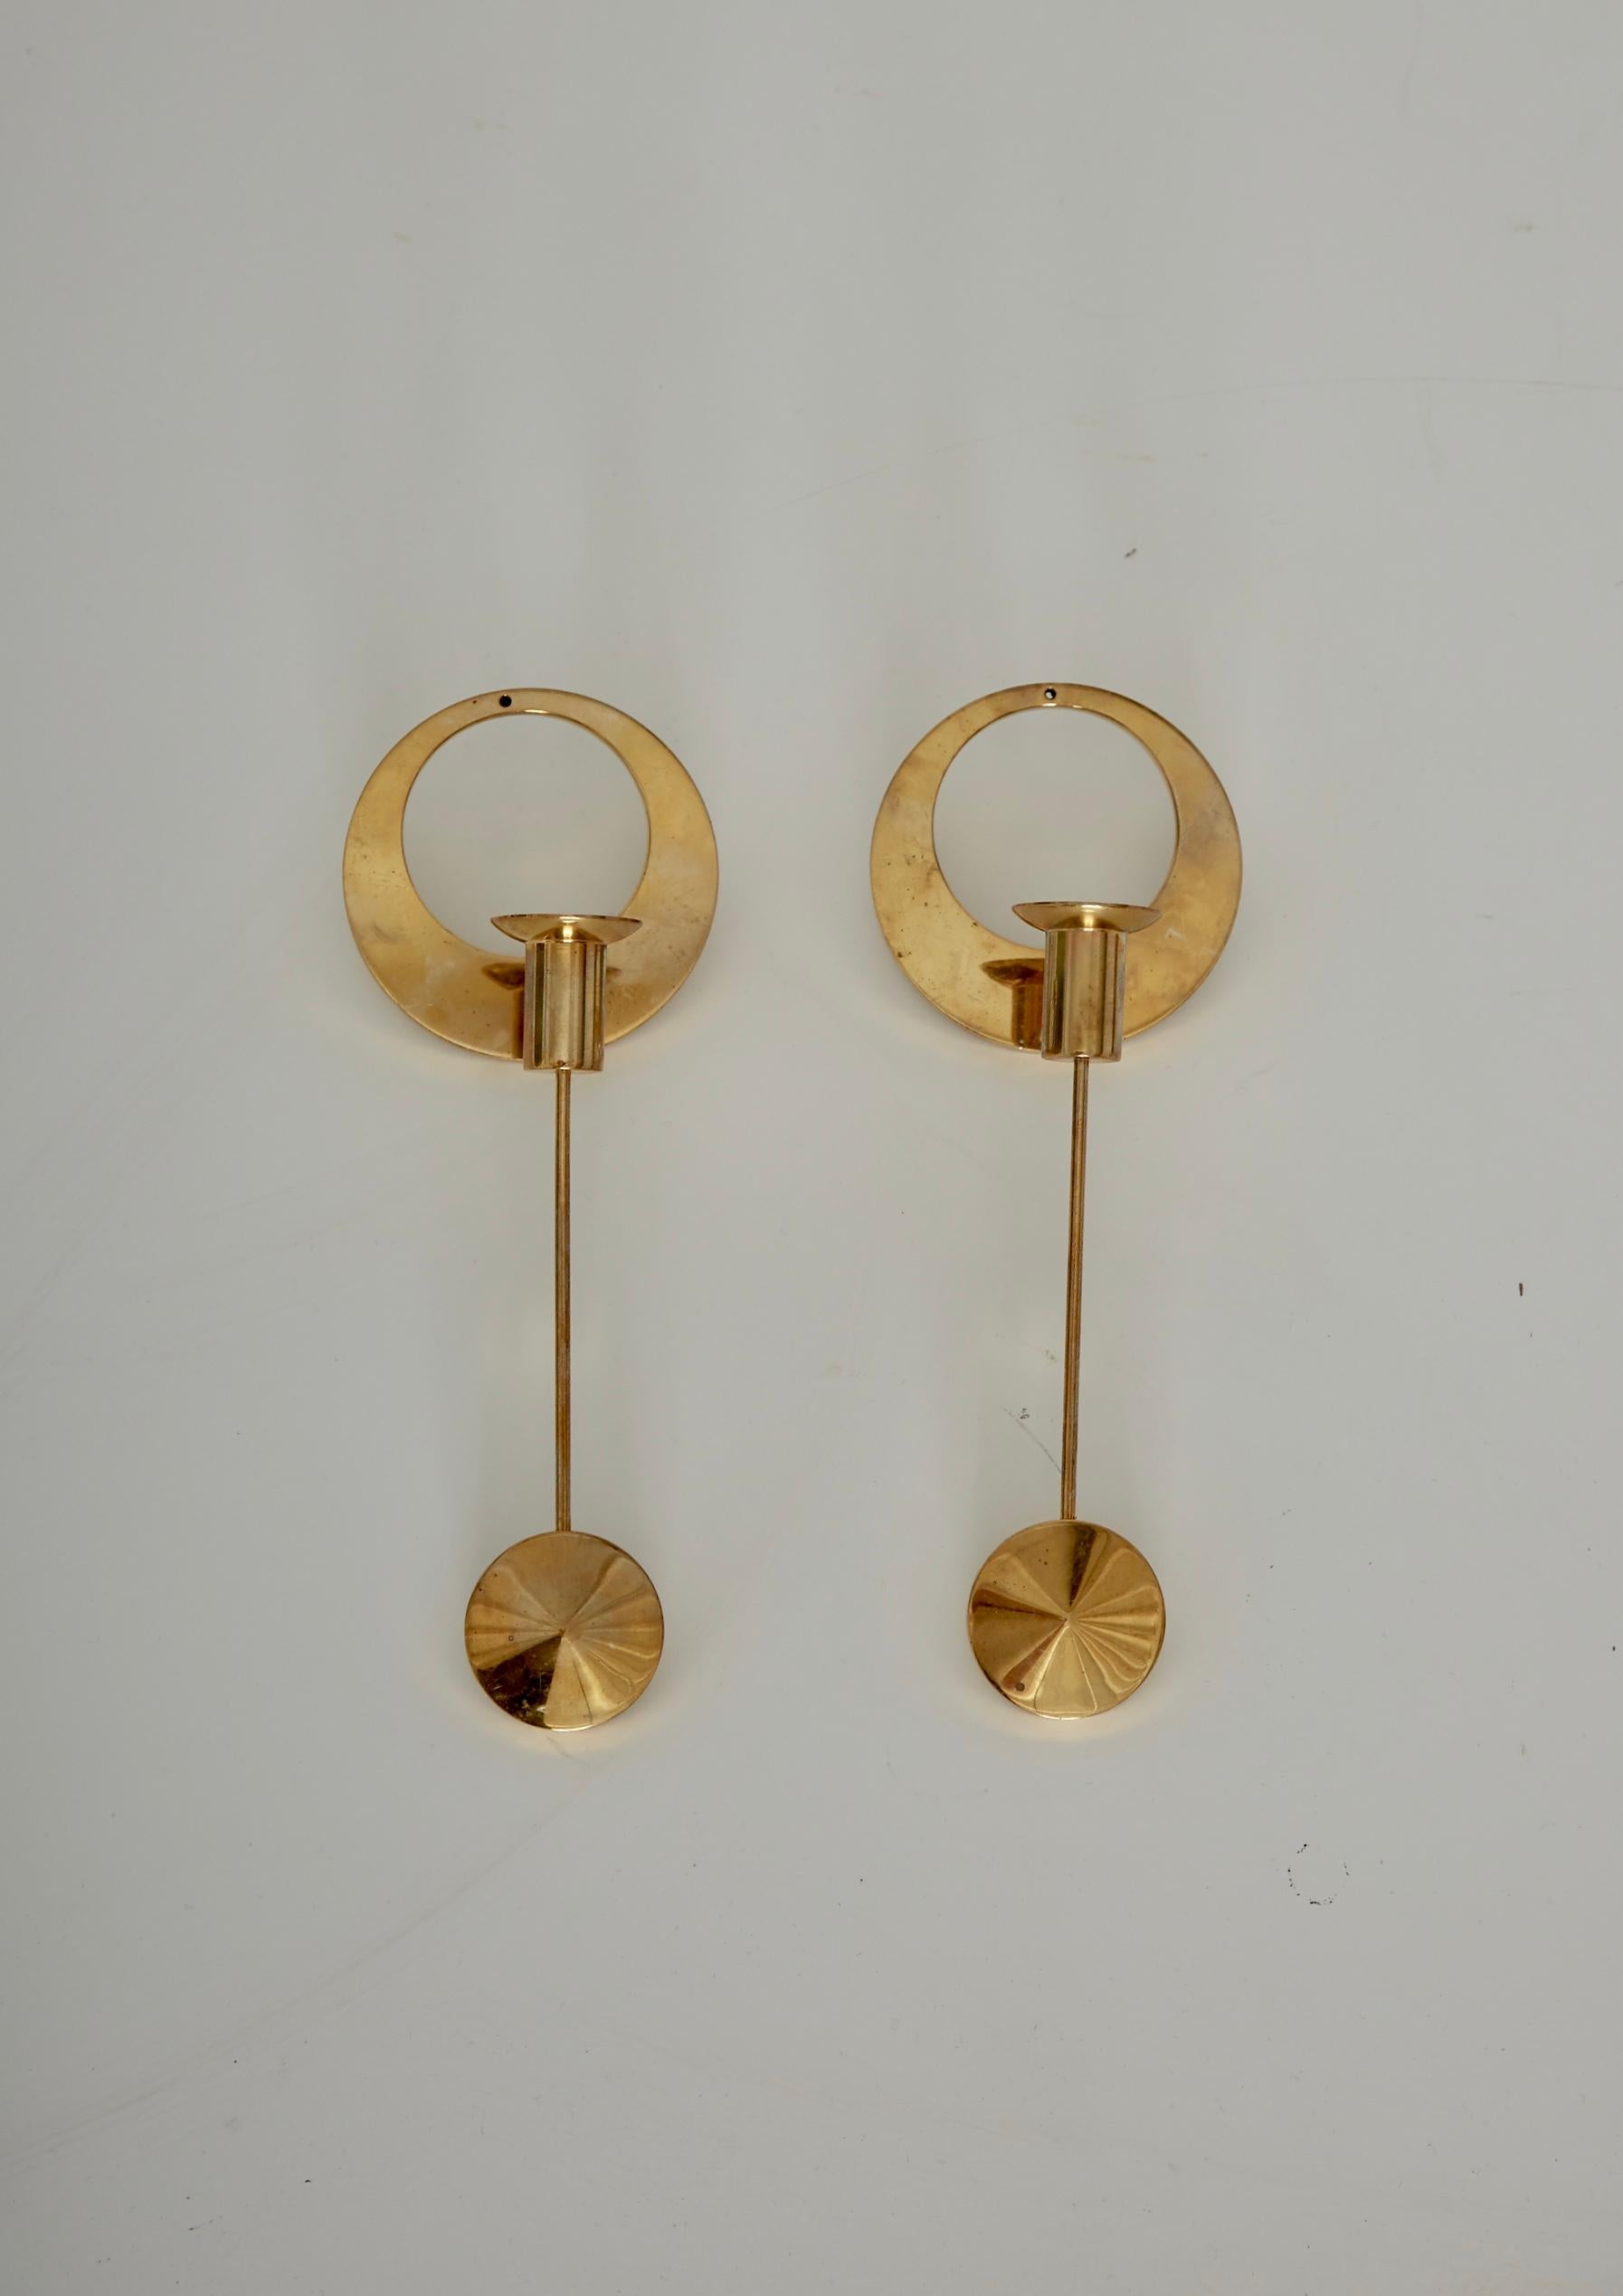 A pair of elegant midcentury brass wall-mounted candleholders, by Artur Pe Kolbäck. In good vintage condition with a nice natural patina. Stamped with makers mark. The price is for the pair. Free US shipping.
 
       